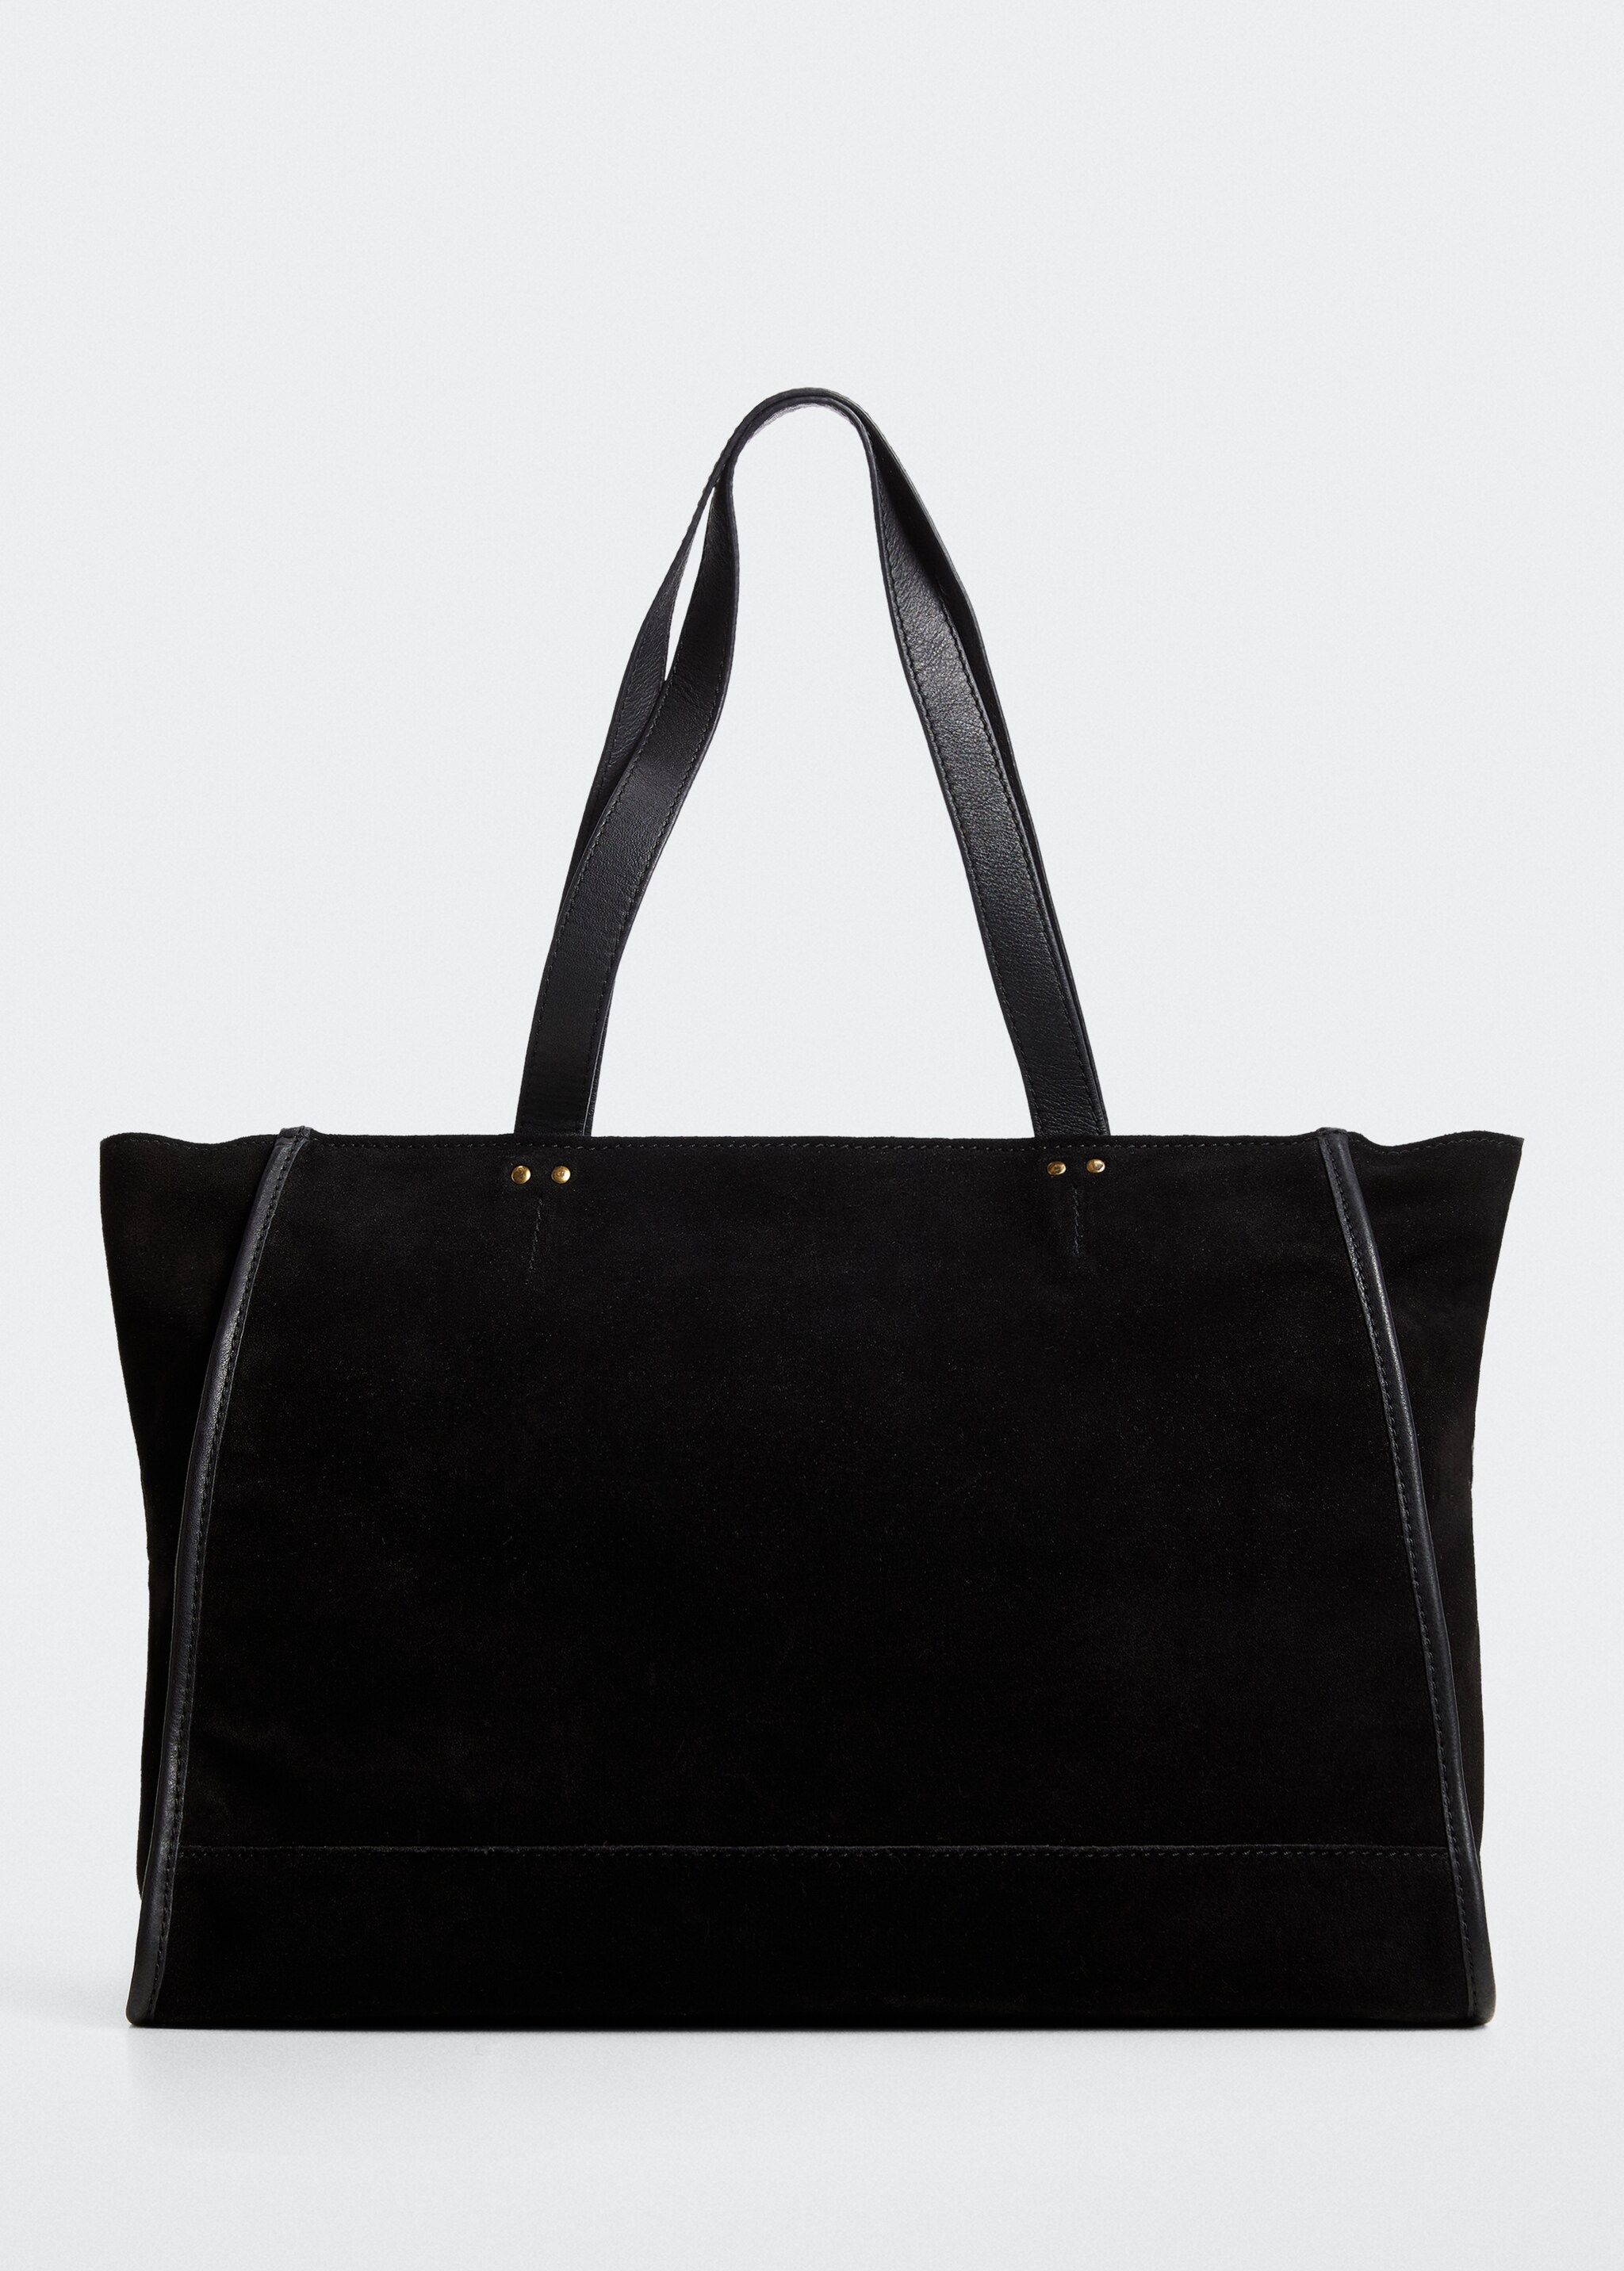 Leather shopper bag - Article without model